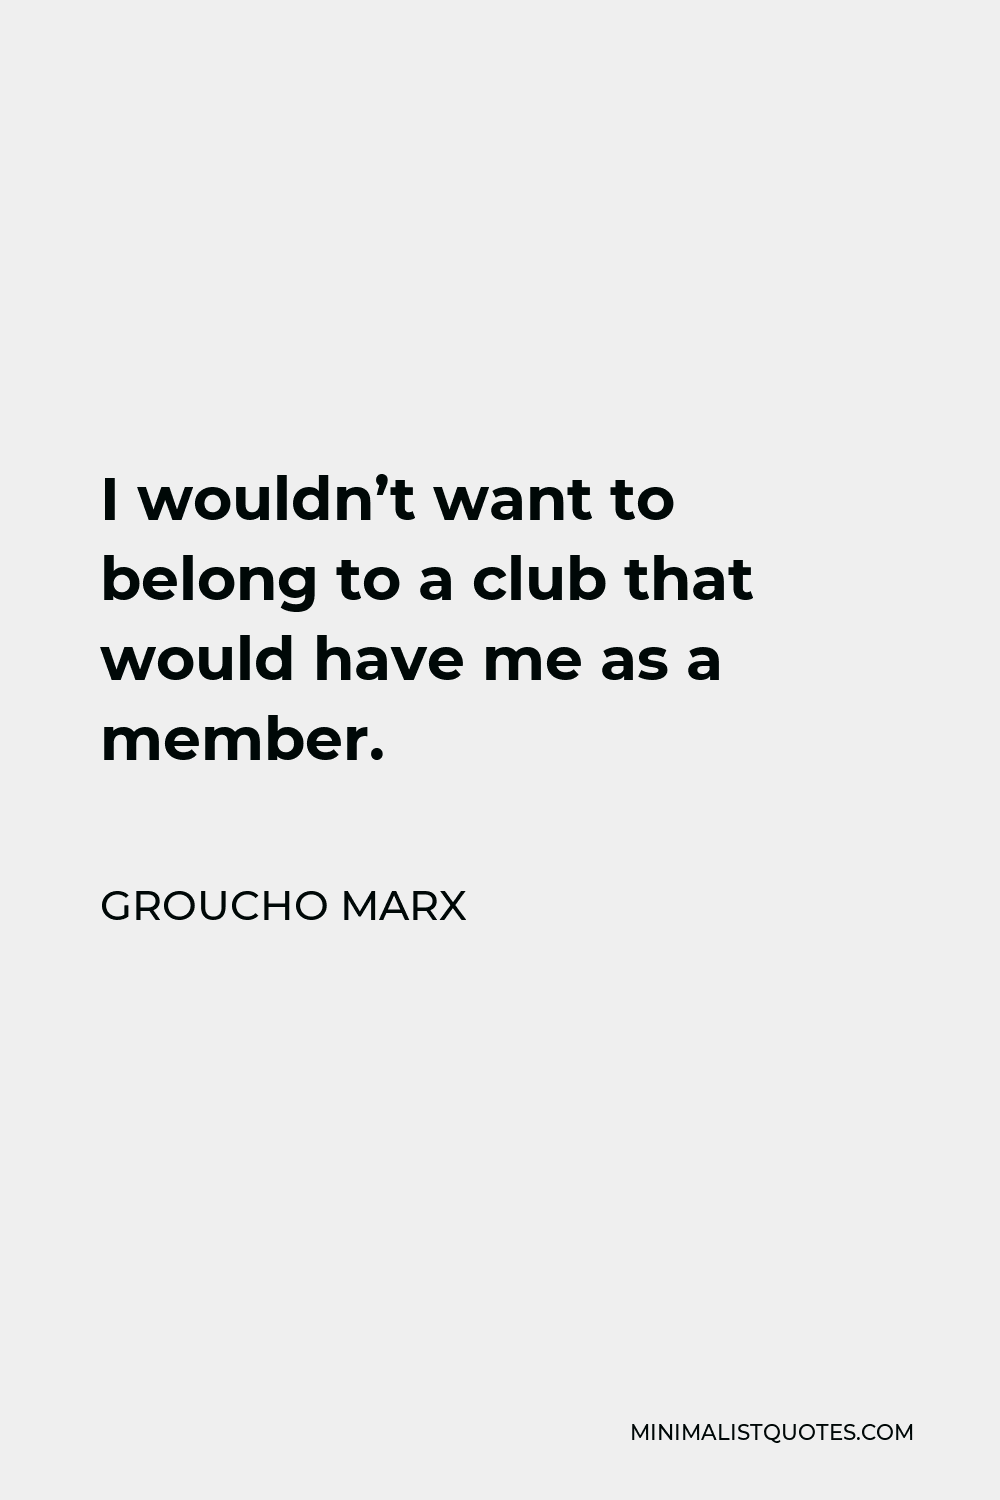 Groucho Marx Quote: I wouldn't want to belong to a club that would have me  as a member.